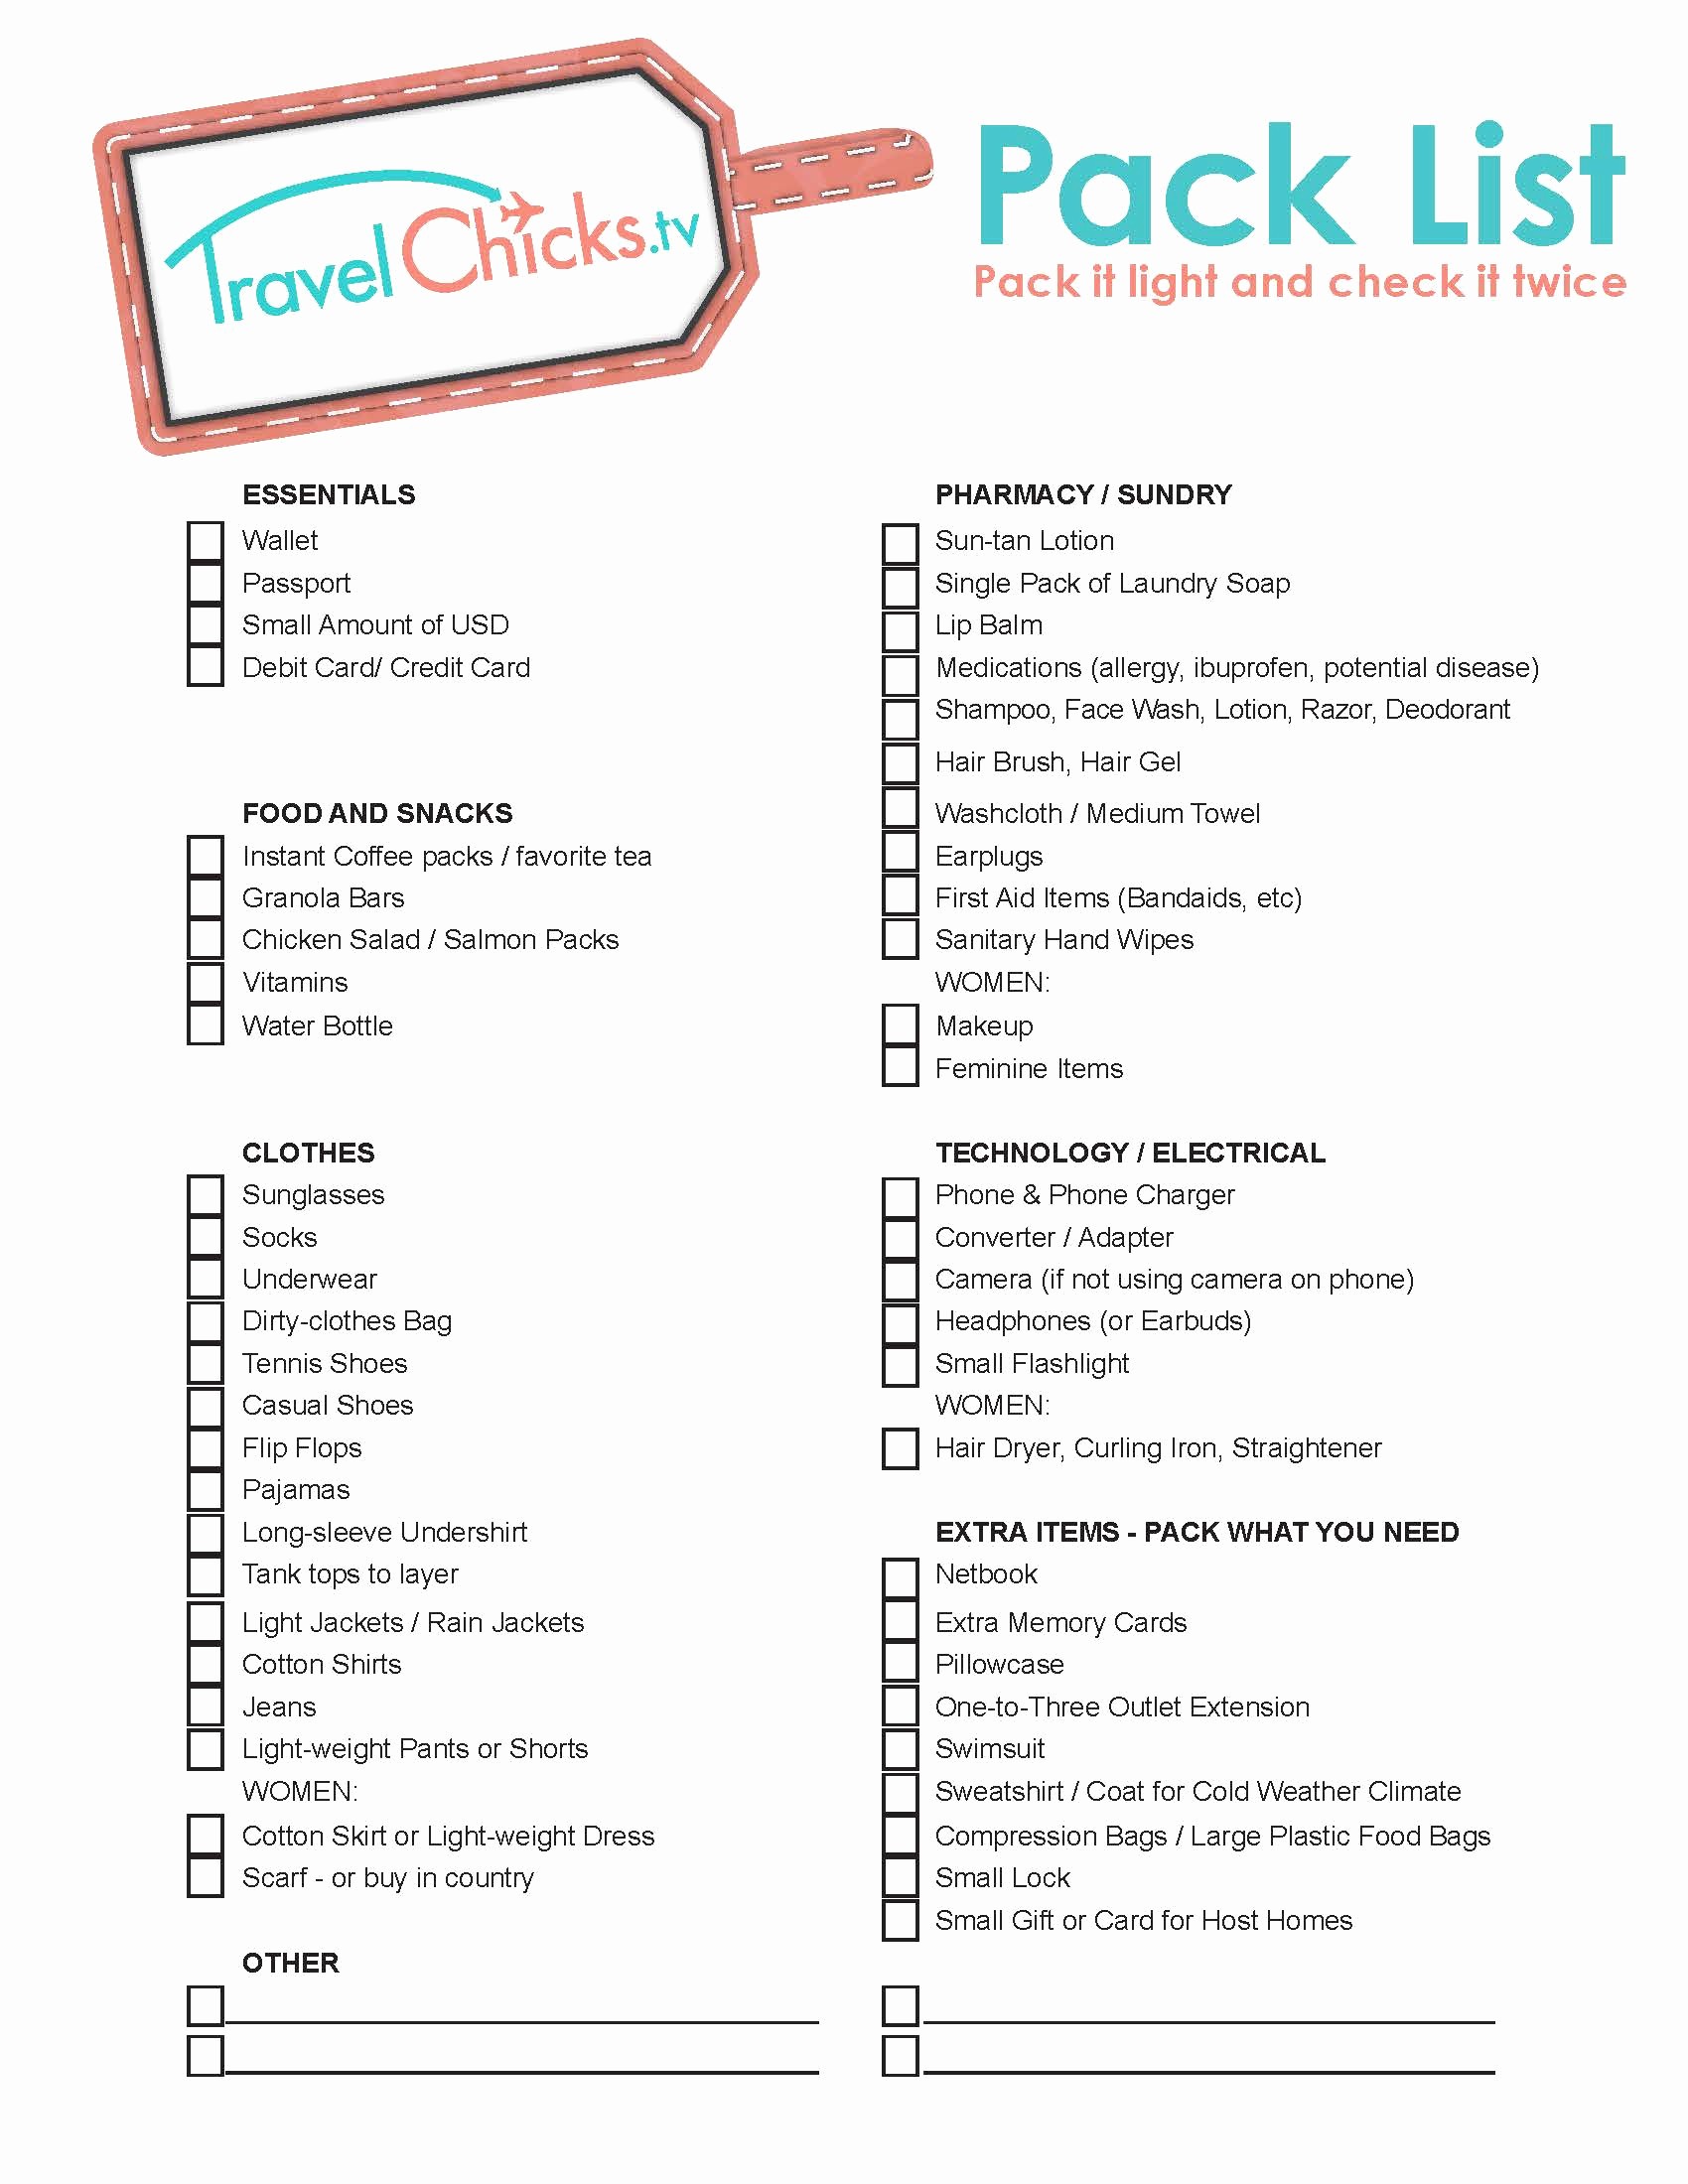 Family Vacation Packing List Template Fresh Travel Packing List Pdf for Women Travel Chicks